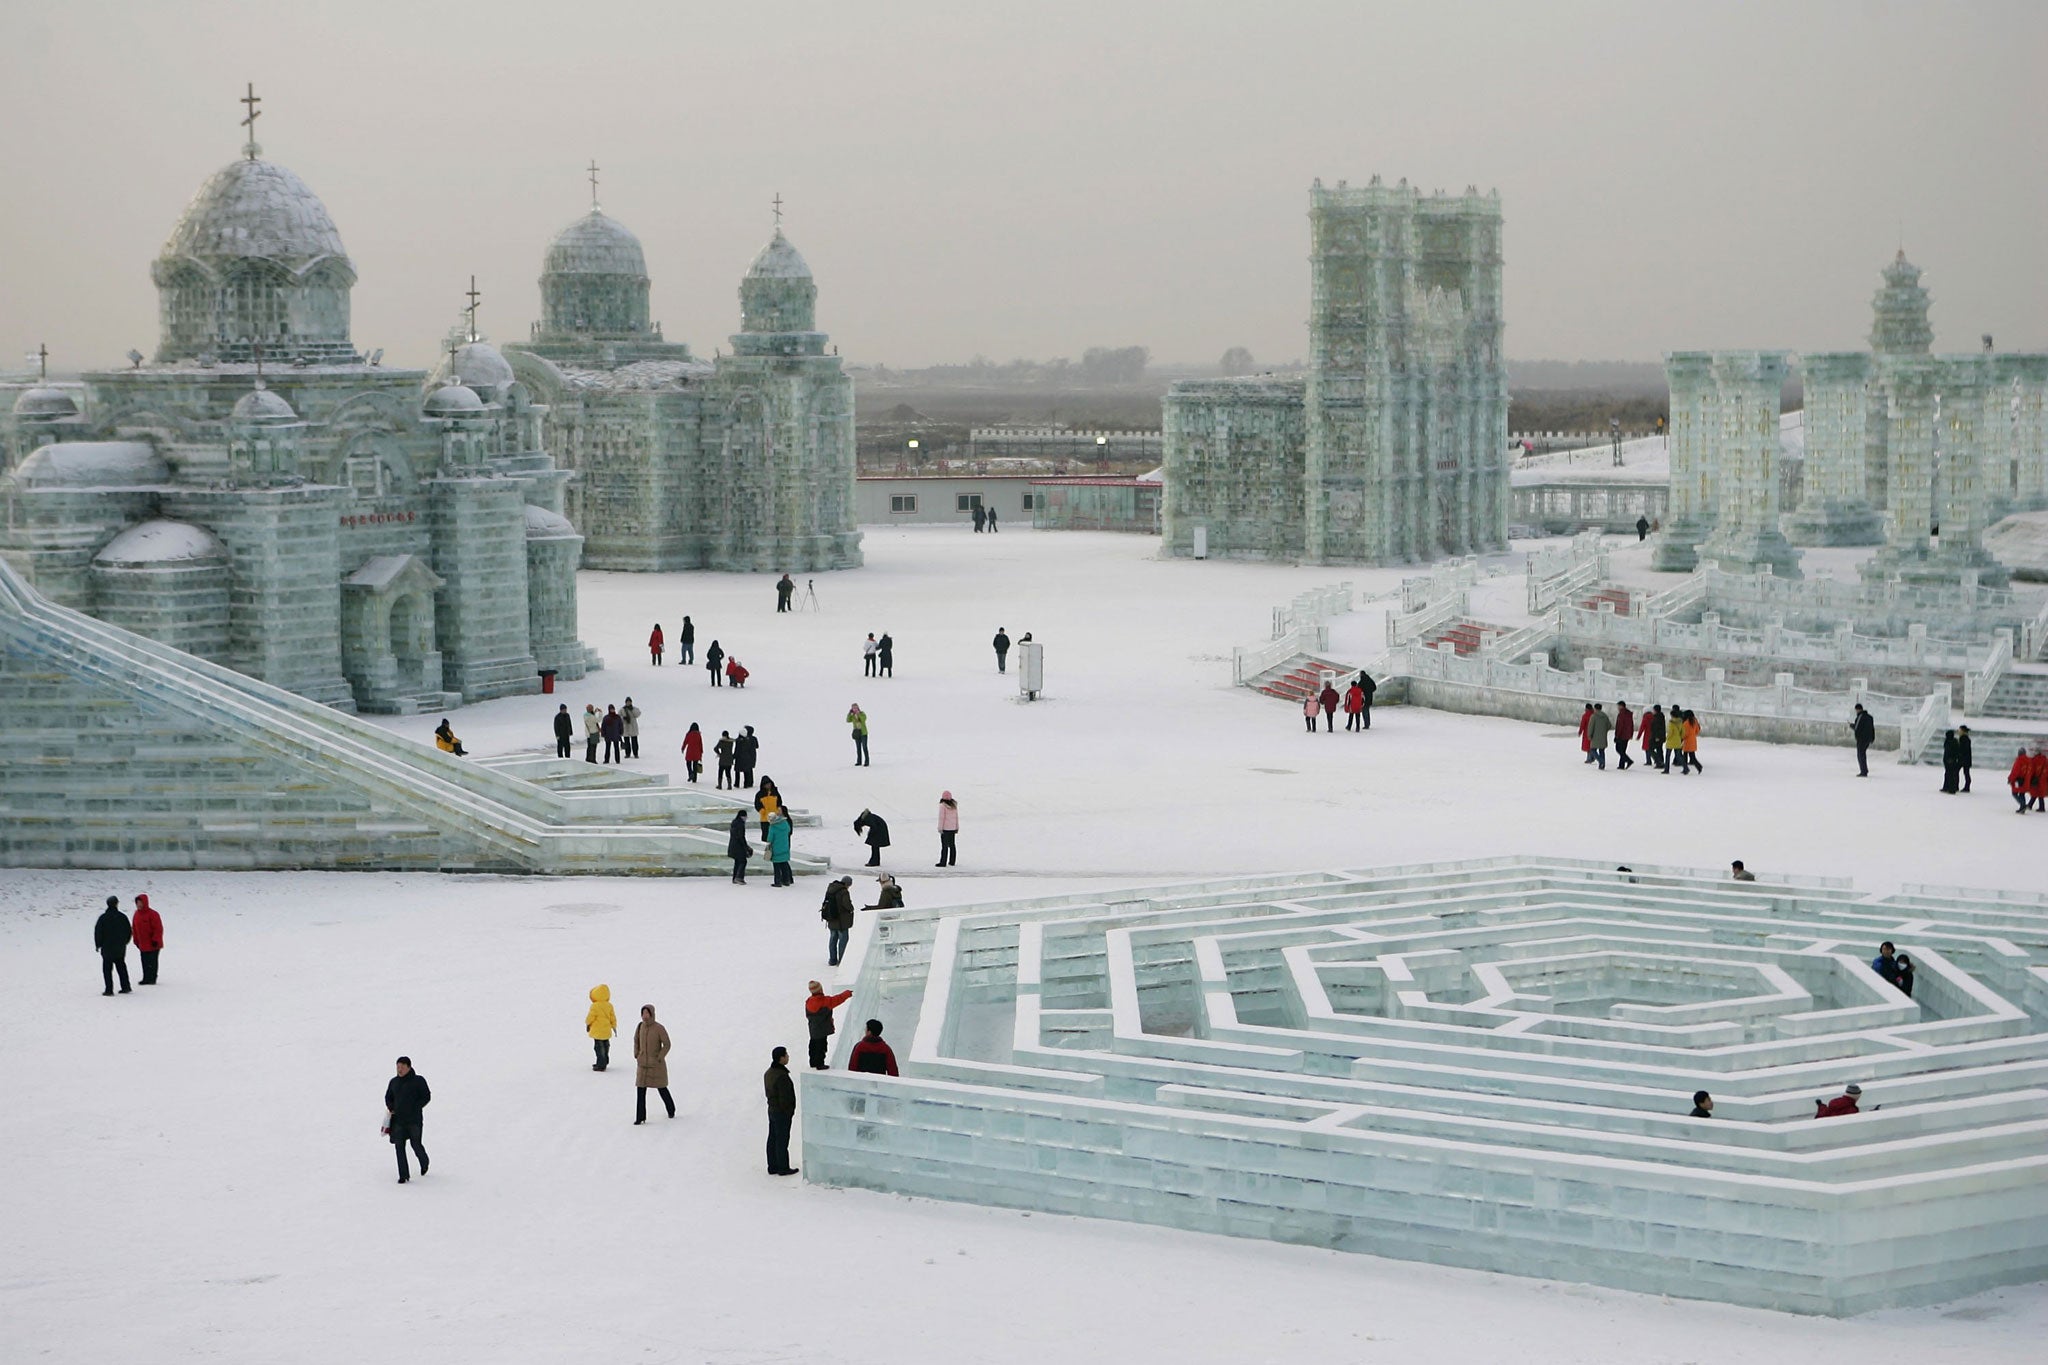 Tourists in one of China's coolest regions inspect buildings constructed out of blocks of ice